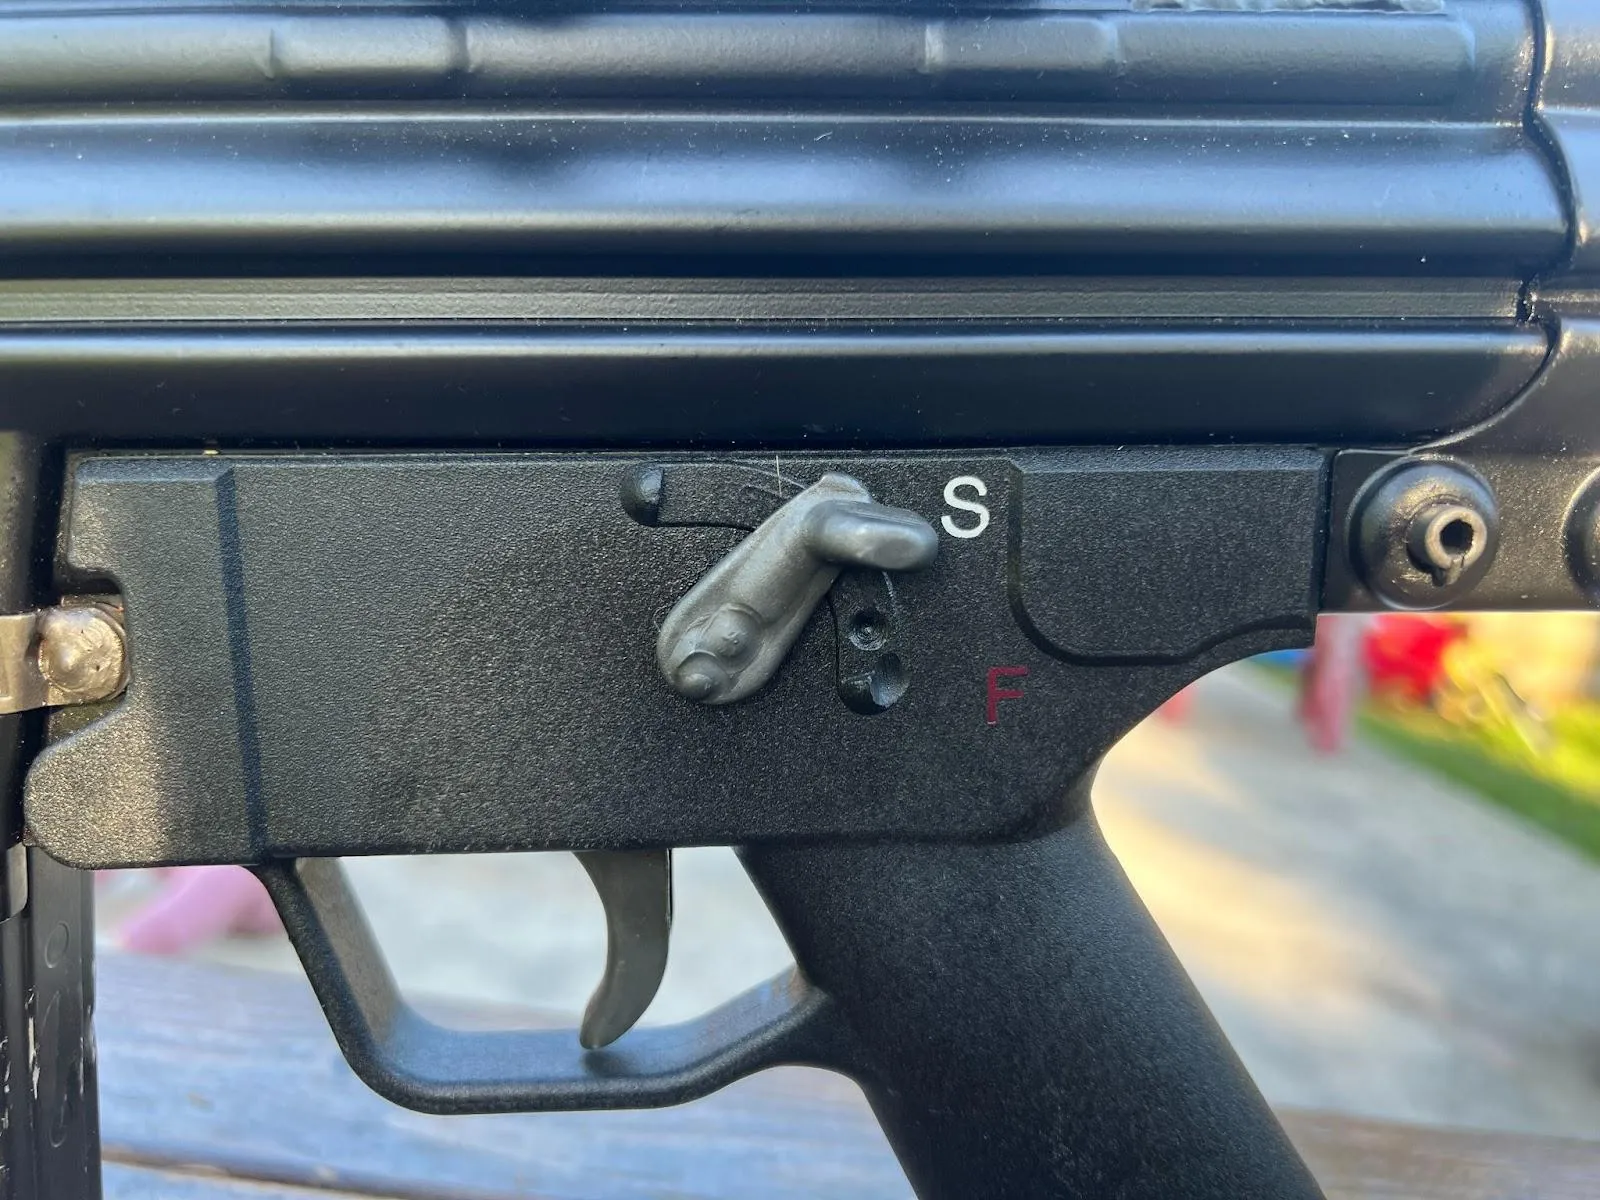 century arms c308 safety review